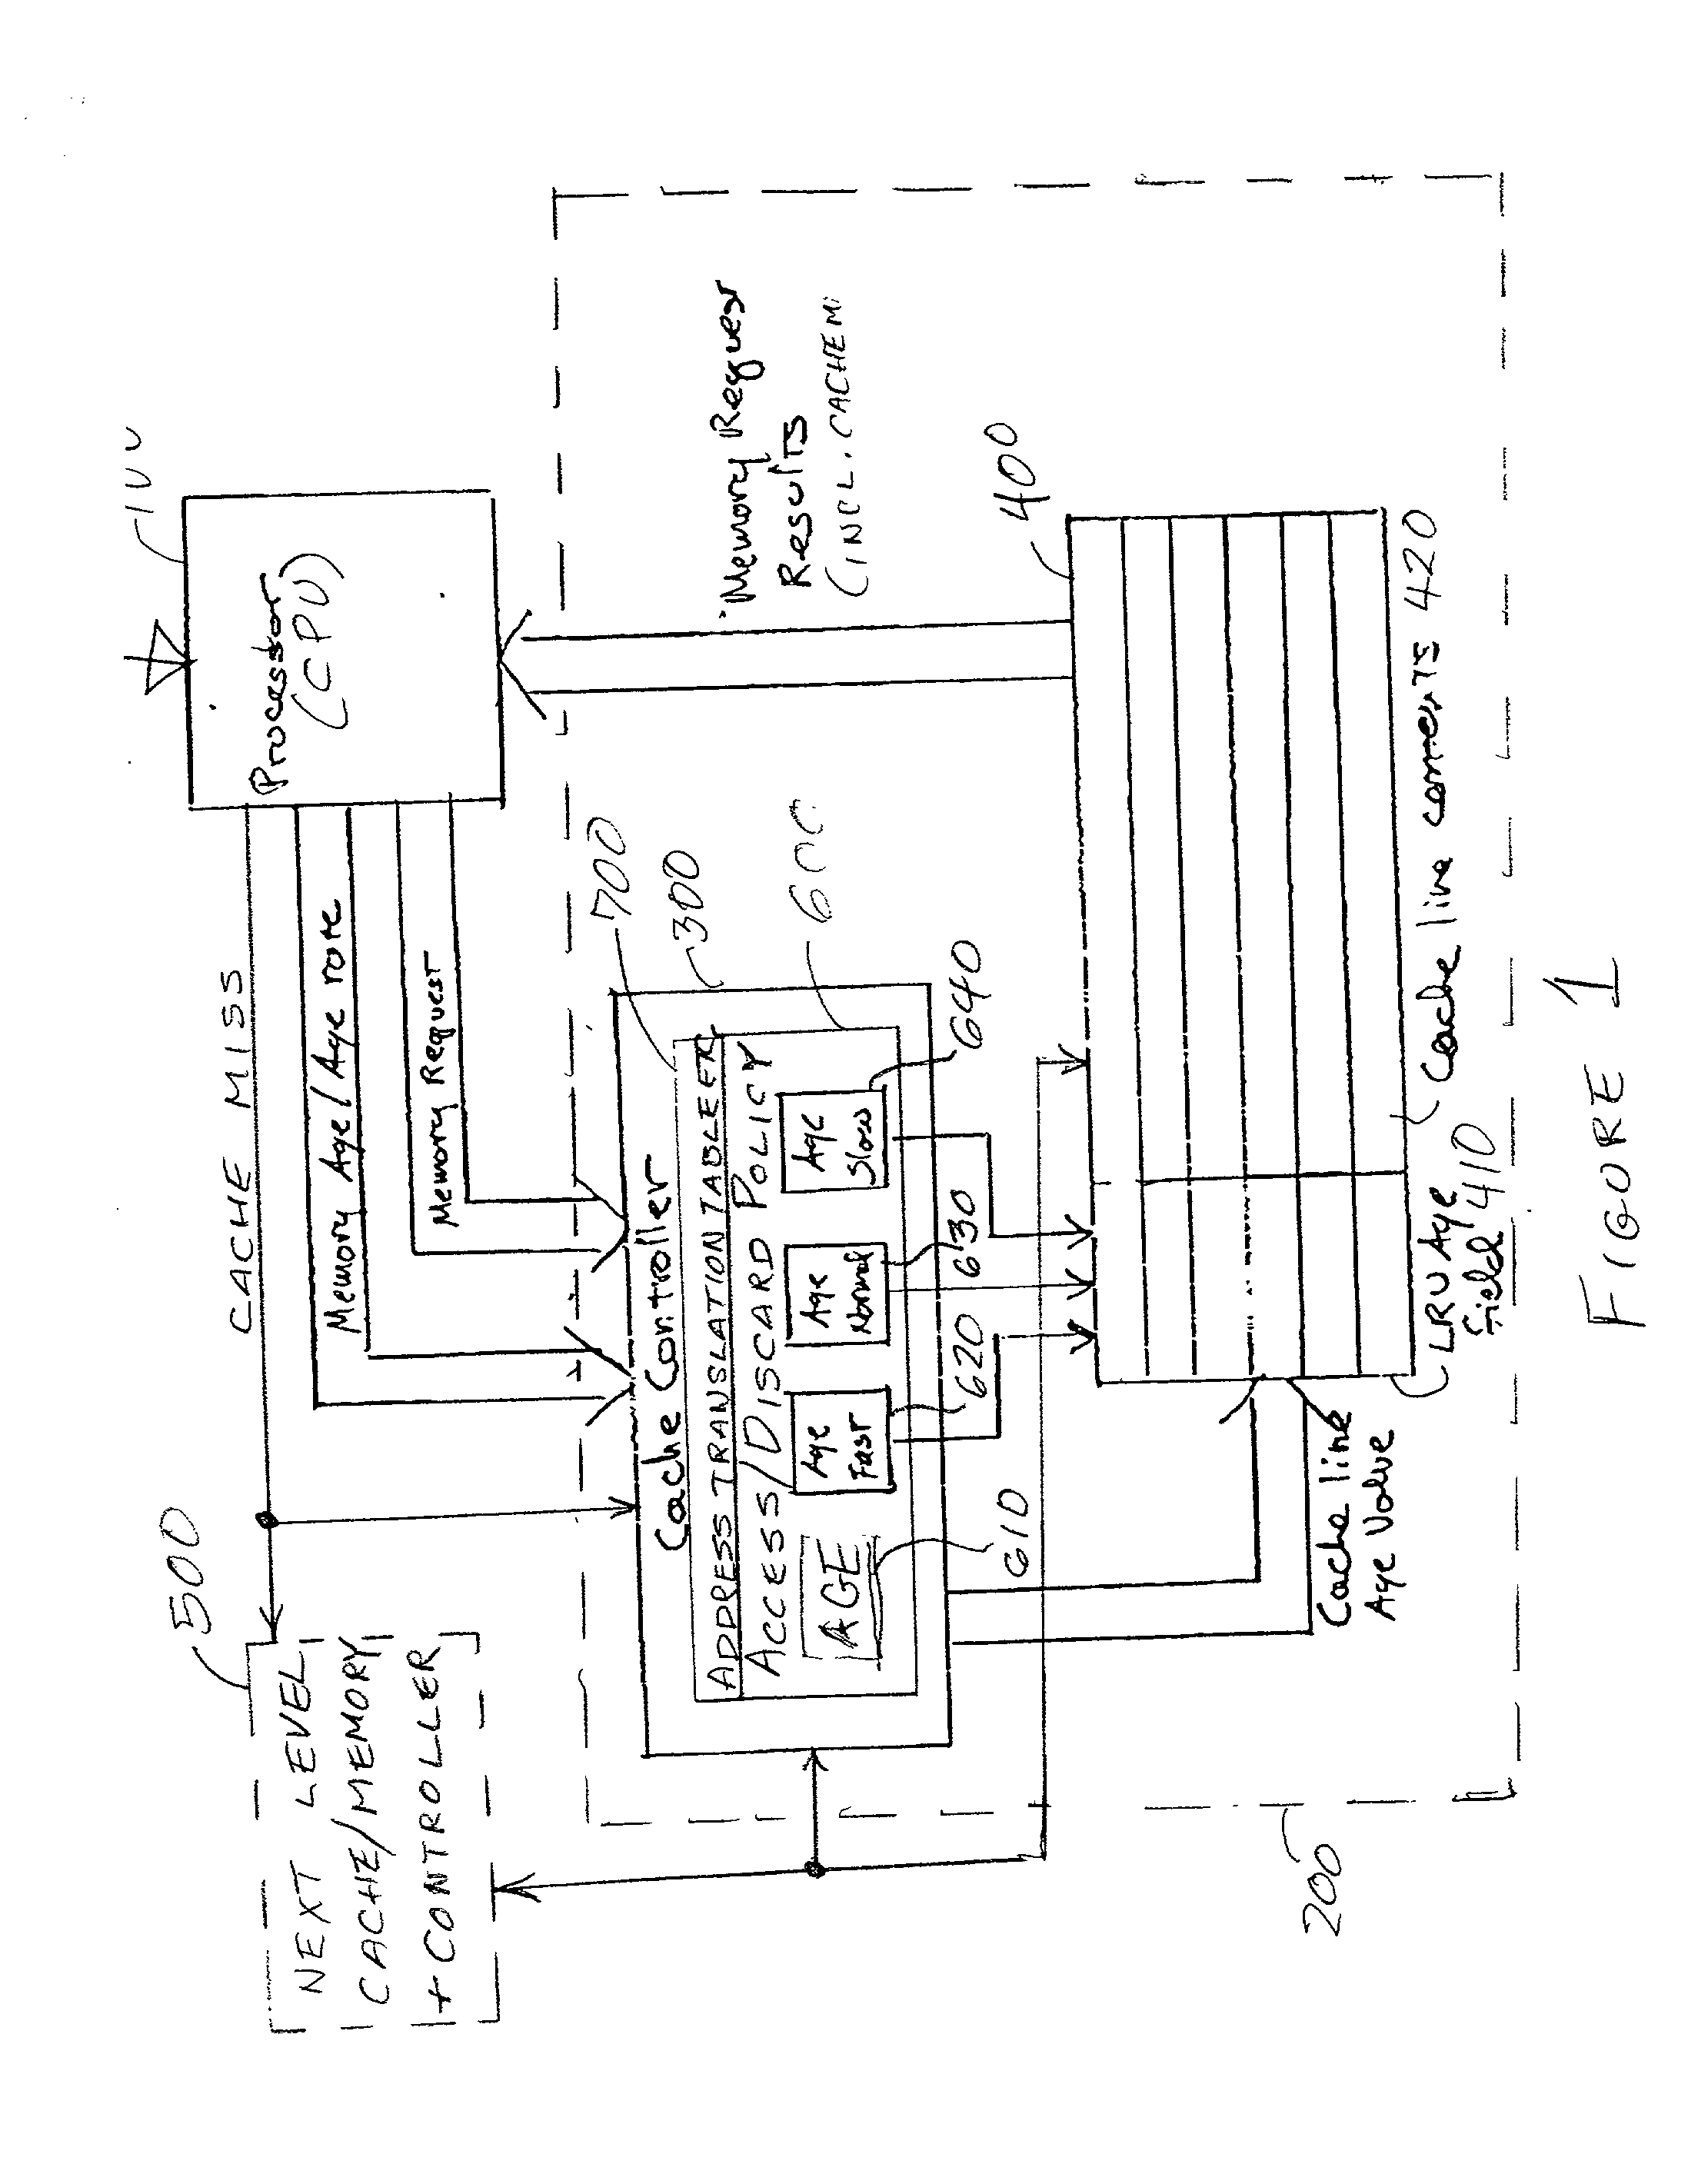 Directed least recently used cache replacement method